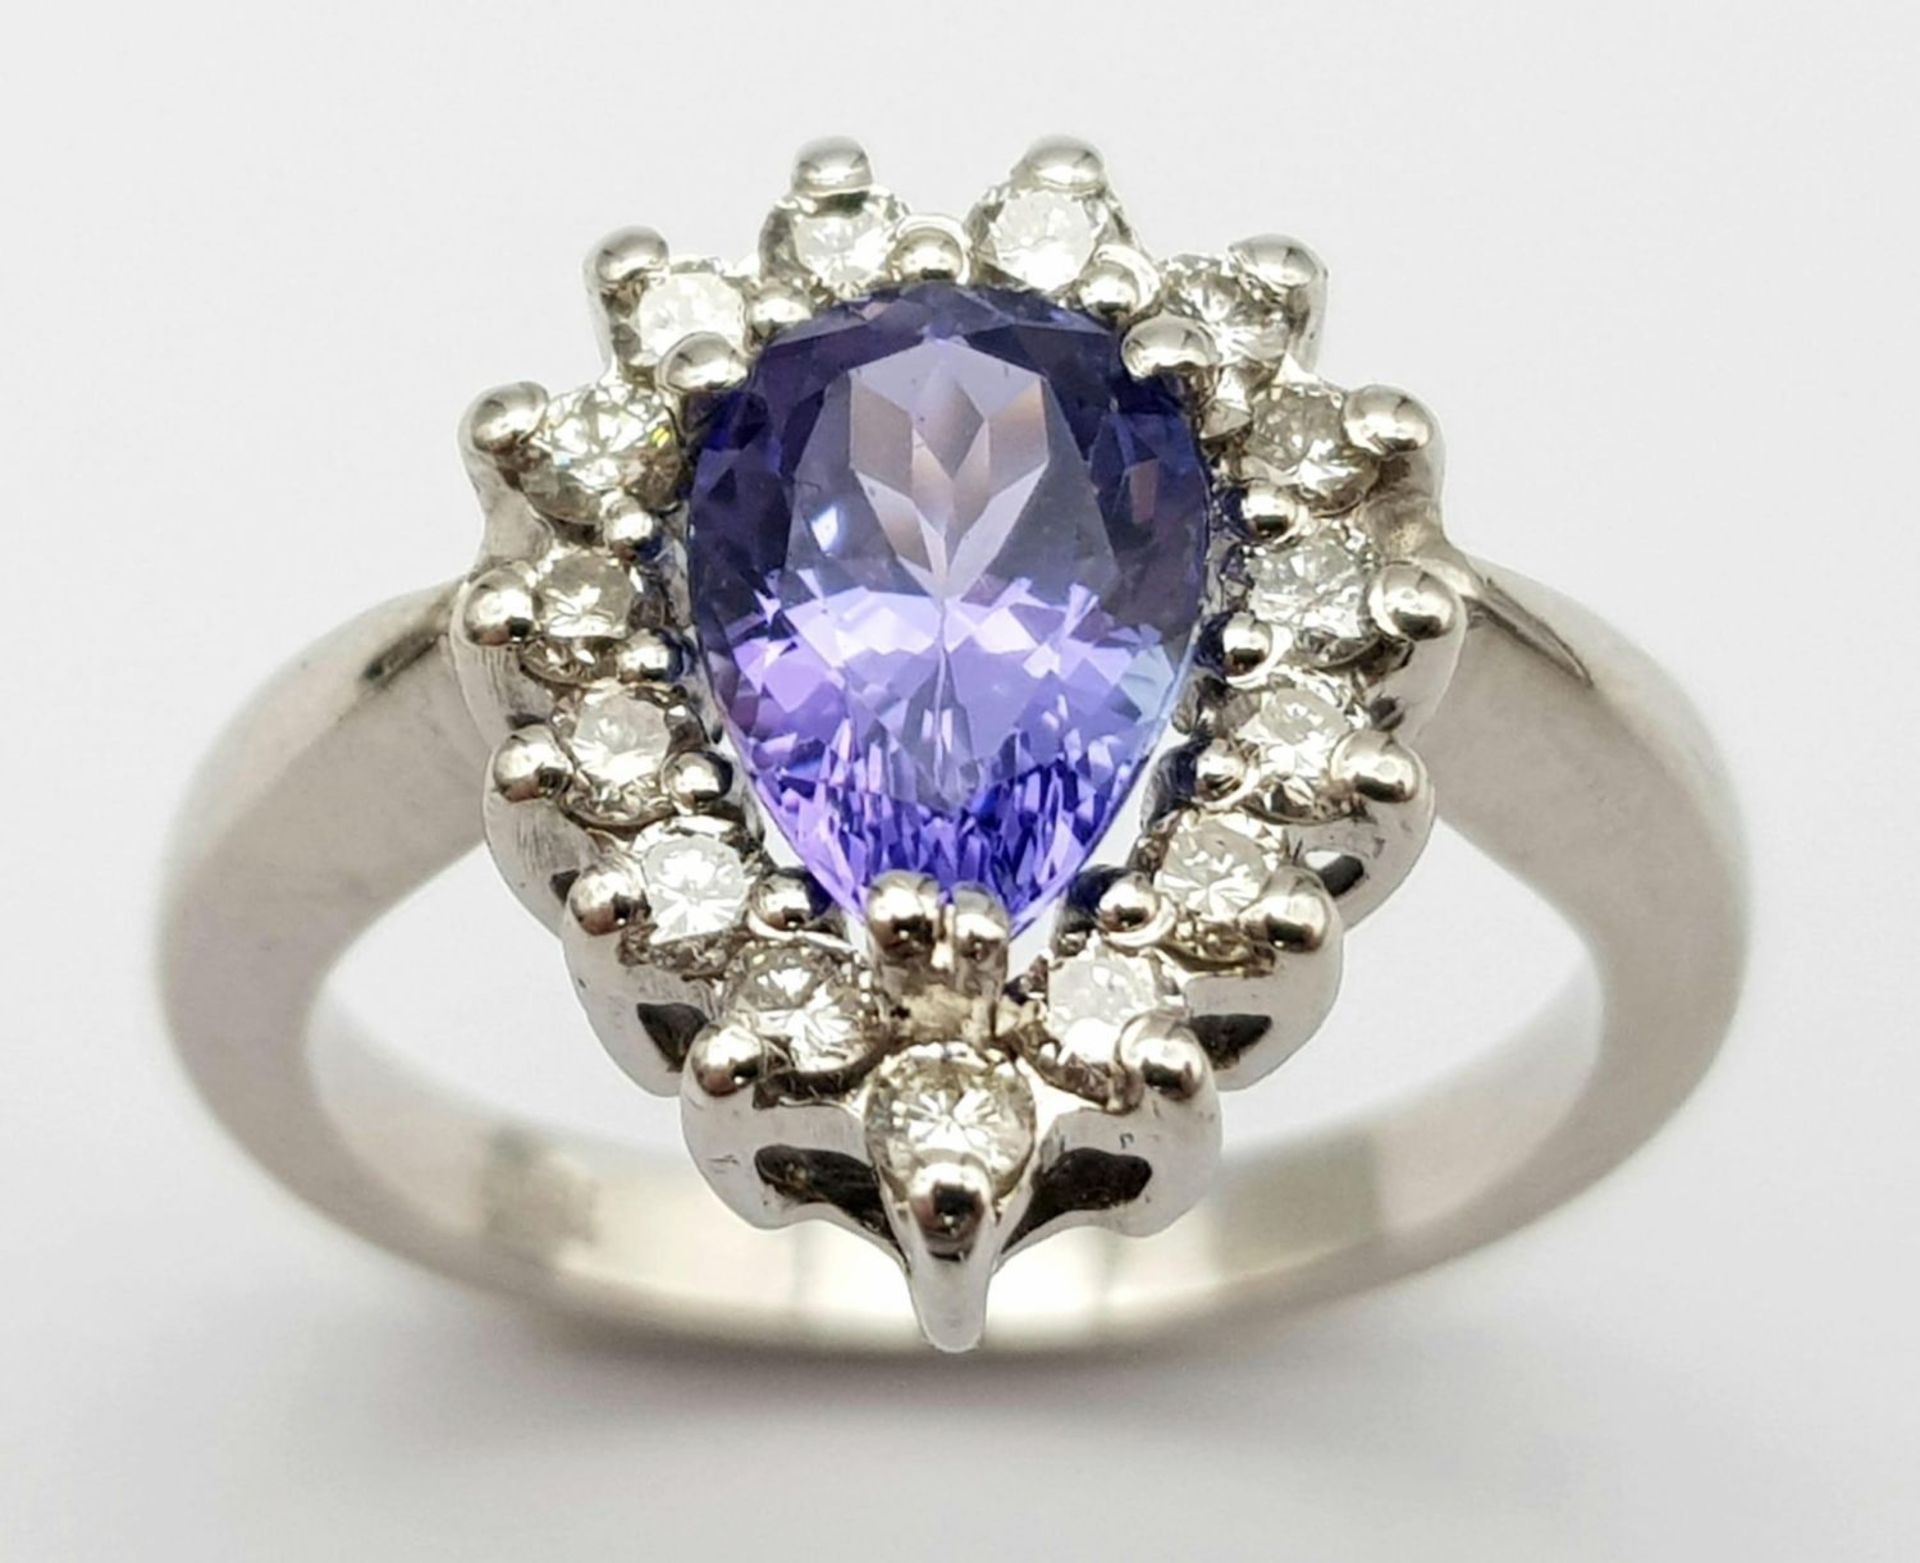 An 18 K white gold ring with a pear cut tanzanite (1.71 carats) surrounded by a halo of diamonds, - Image 5 of 12